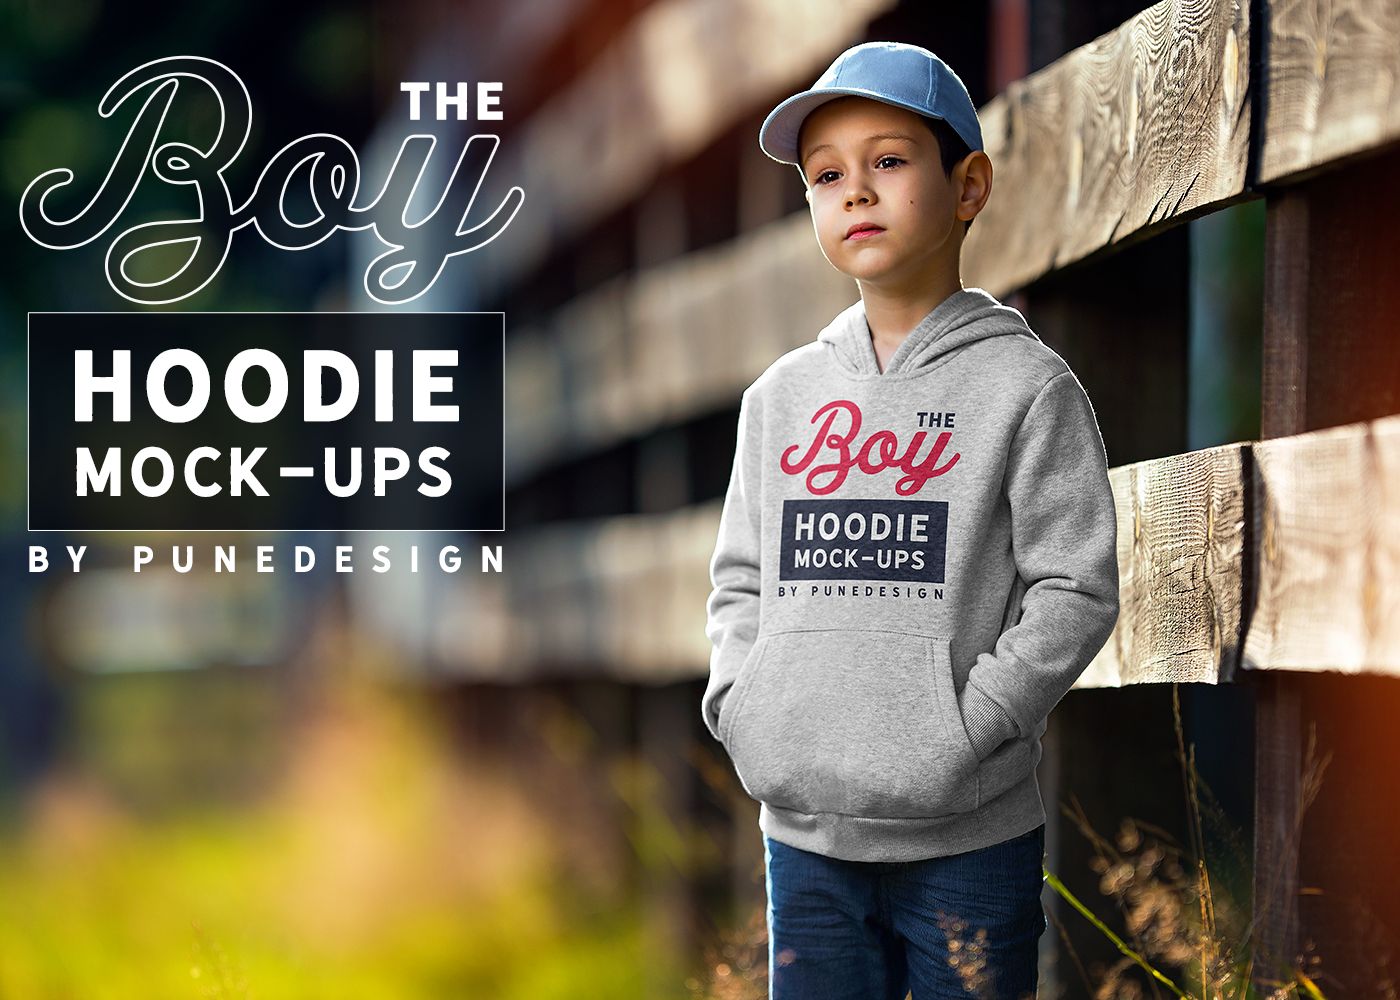 Boy_Hoodie_Mock-Up_by_PuneDesign-00